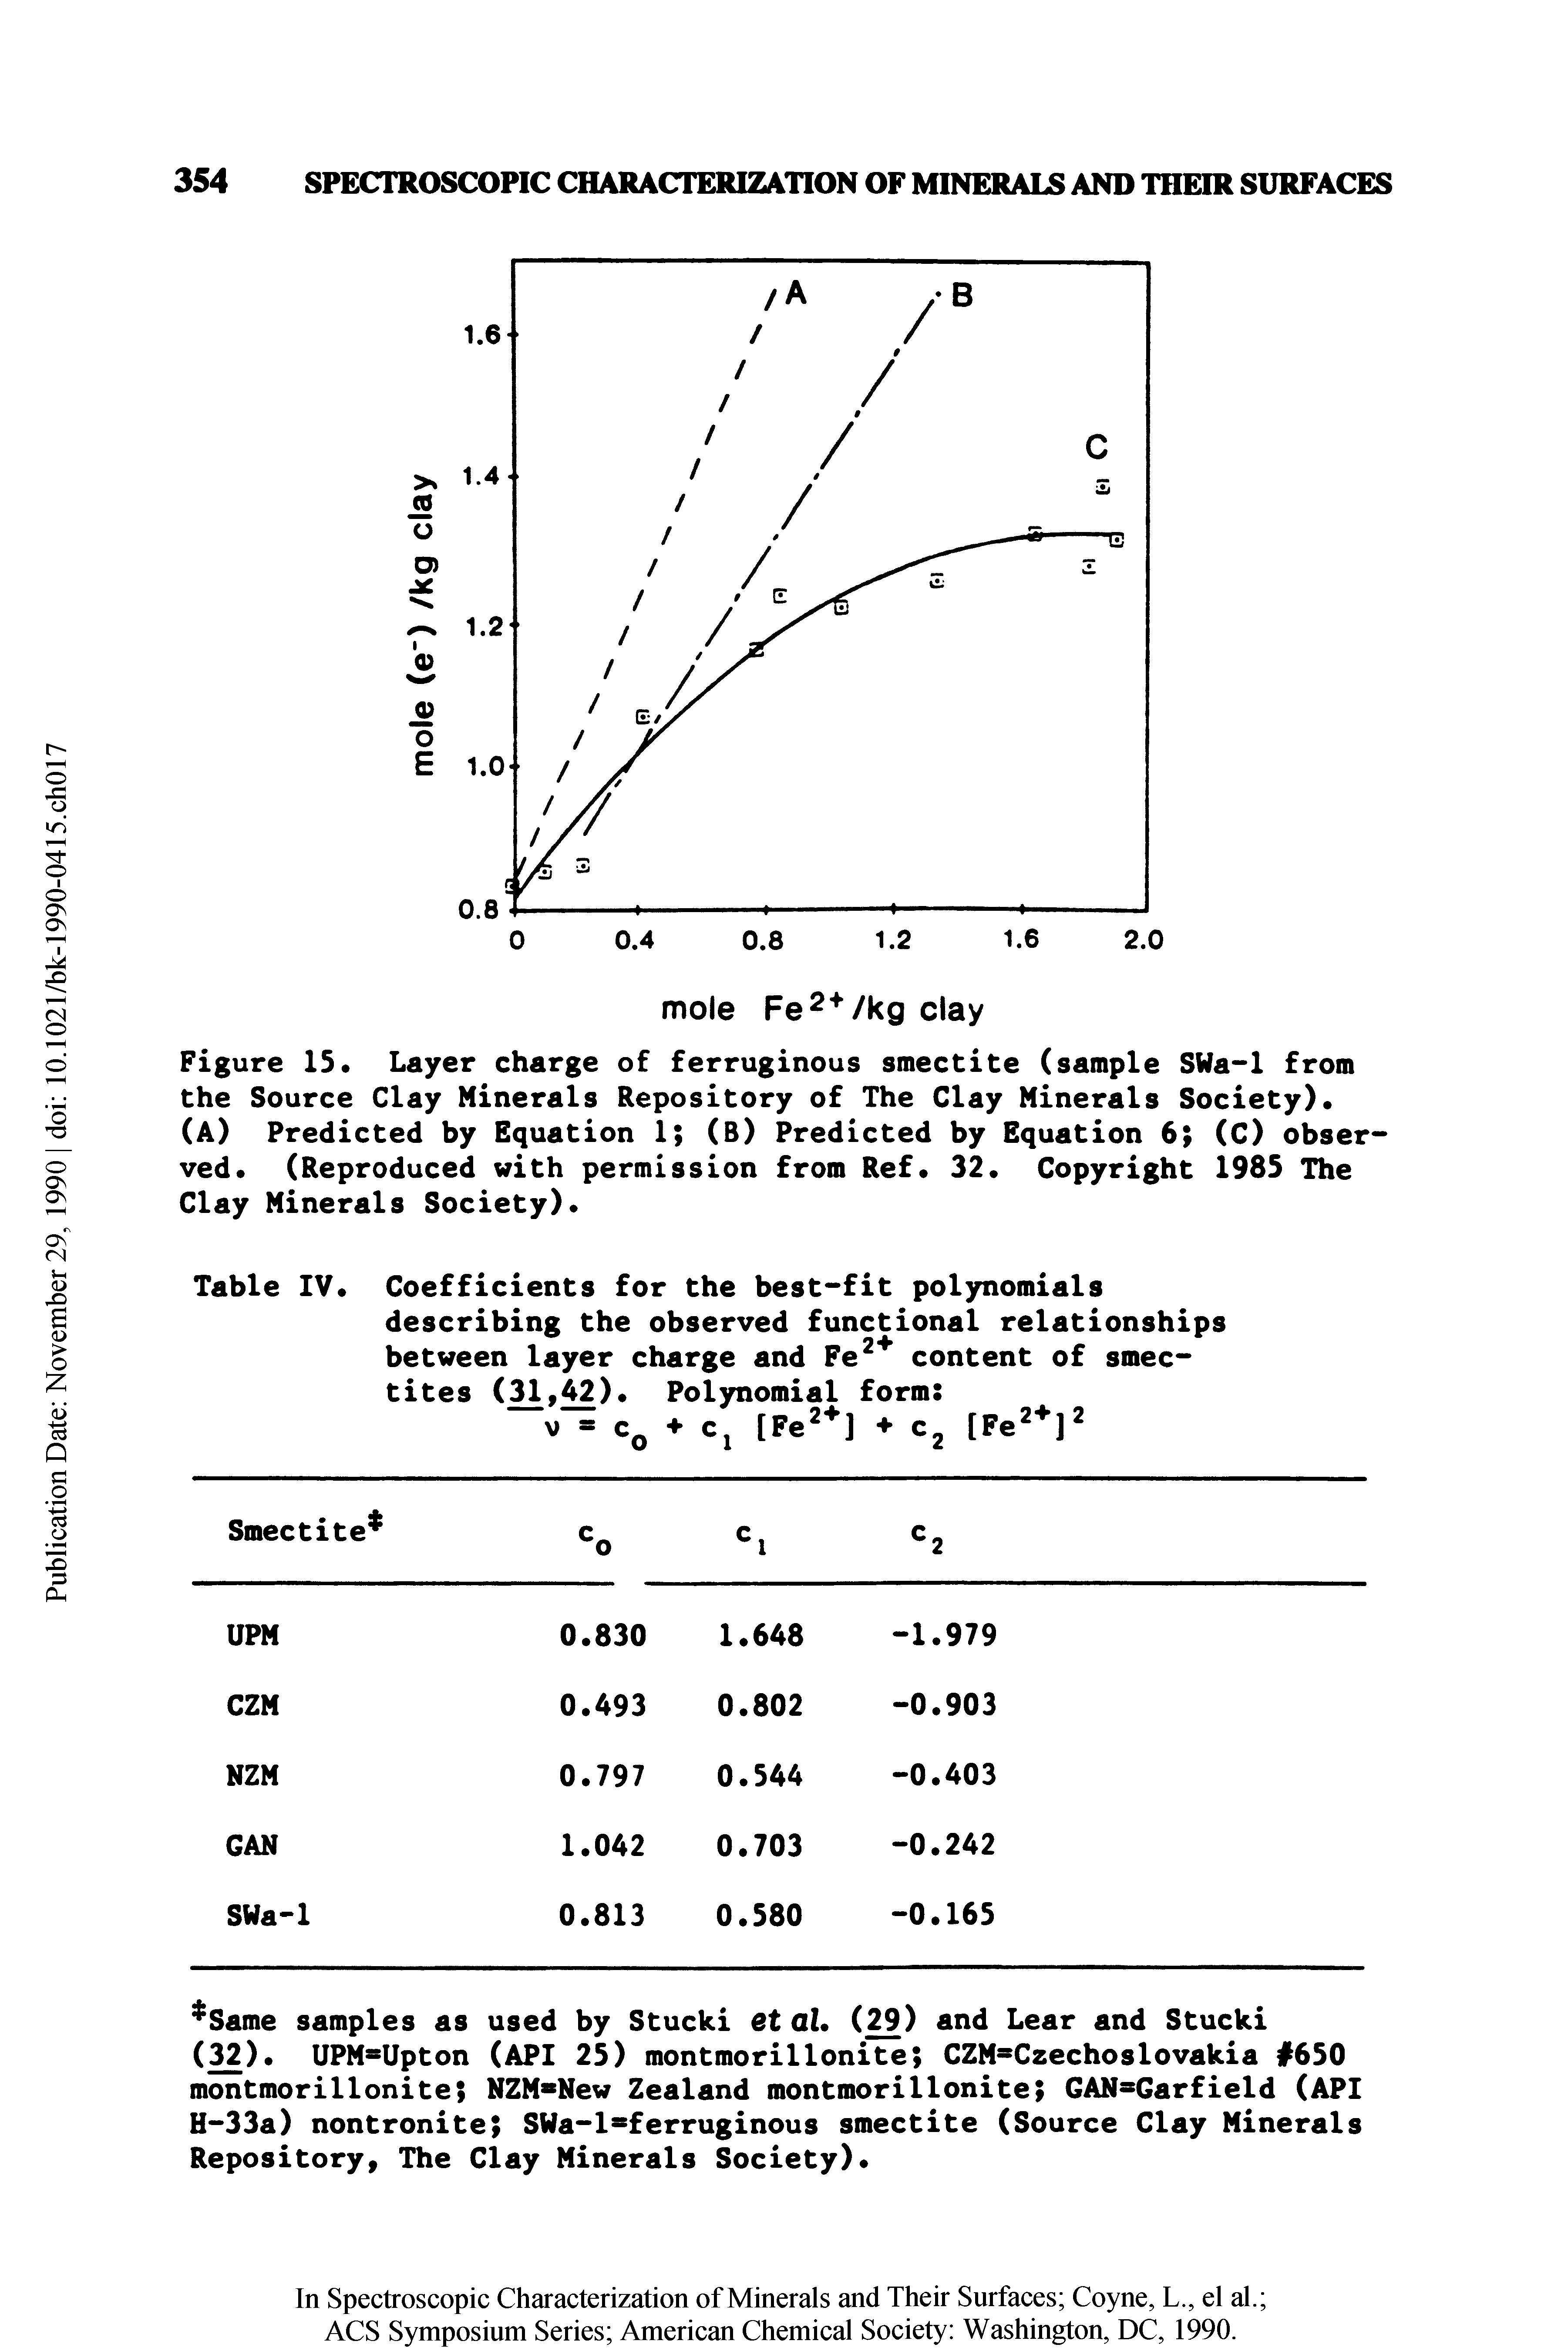 Figure 15 Layer charge of ferruginous smectite (sample SWa-1 from the Source Clay Minerals Repository of The Clay Minerals Society).